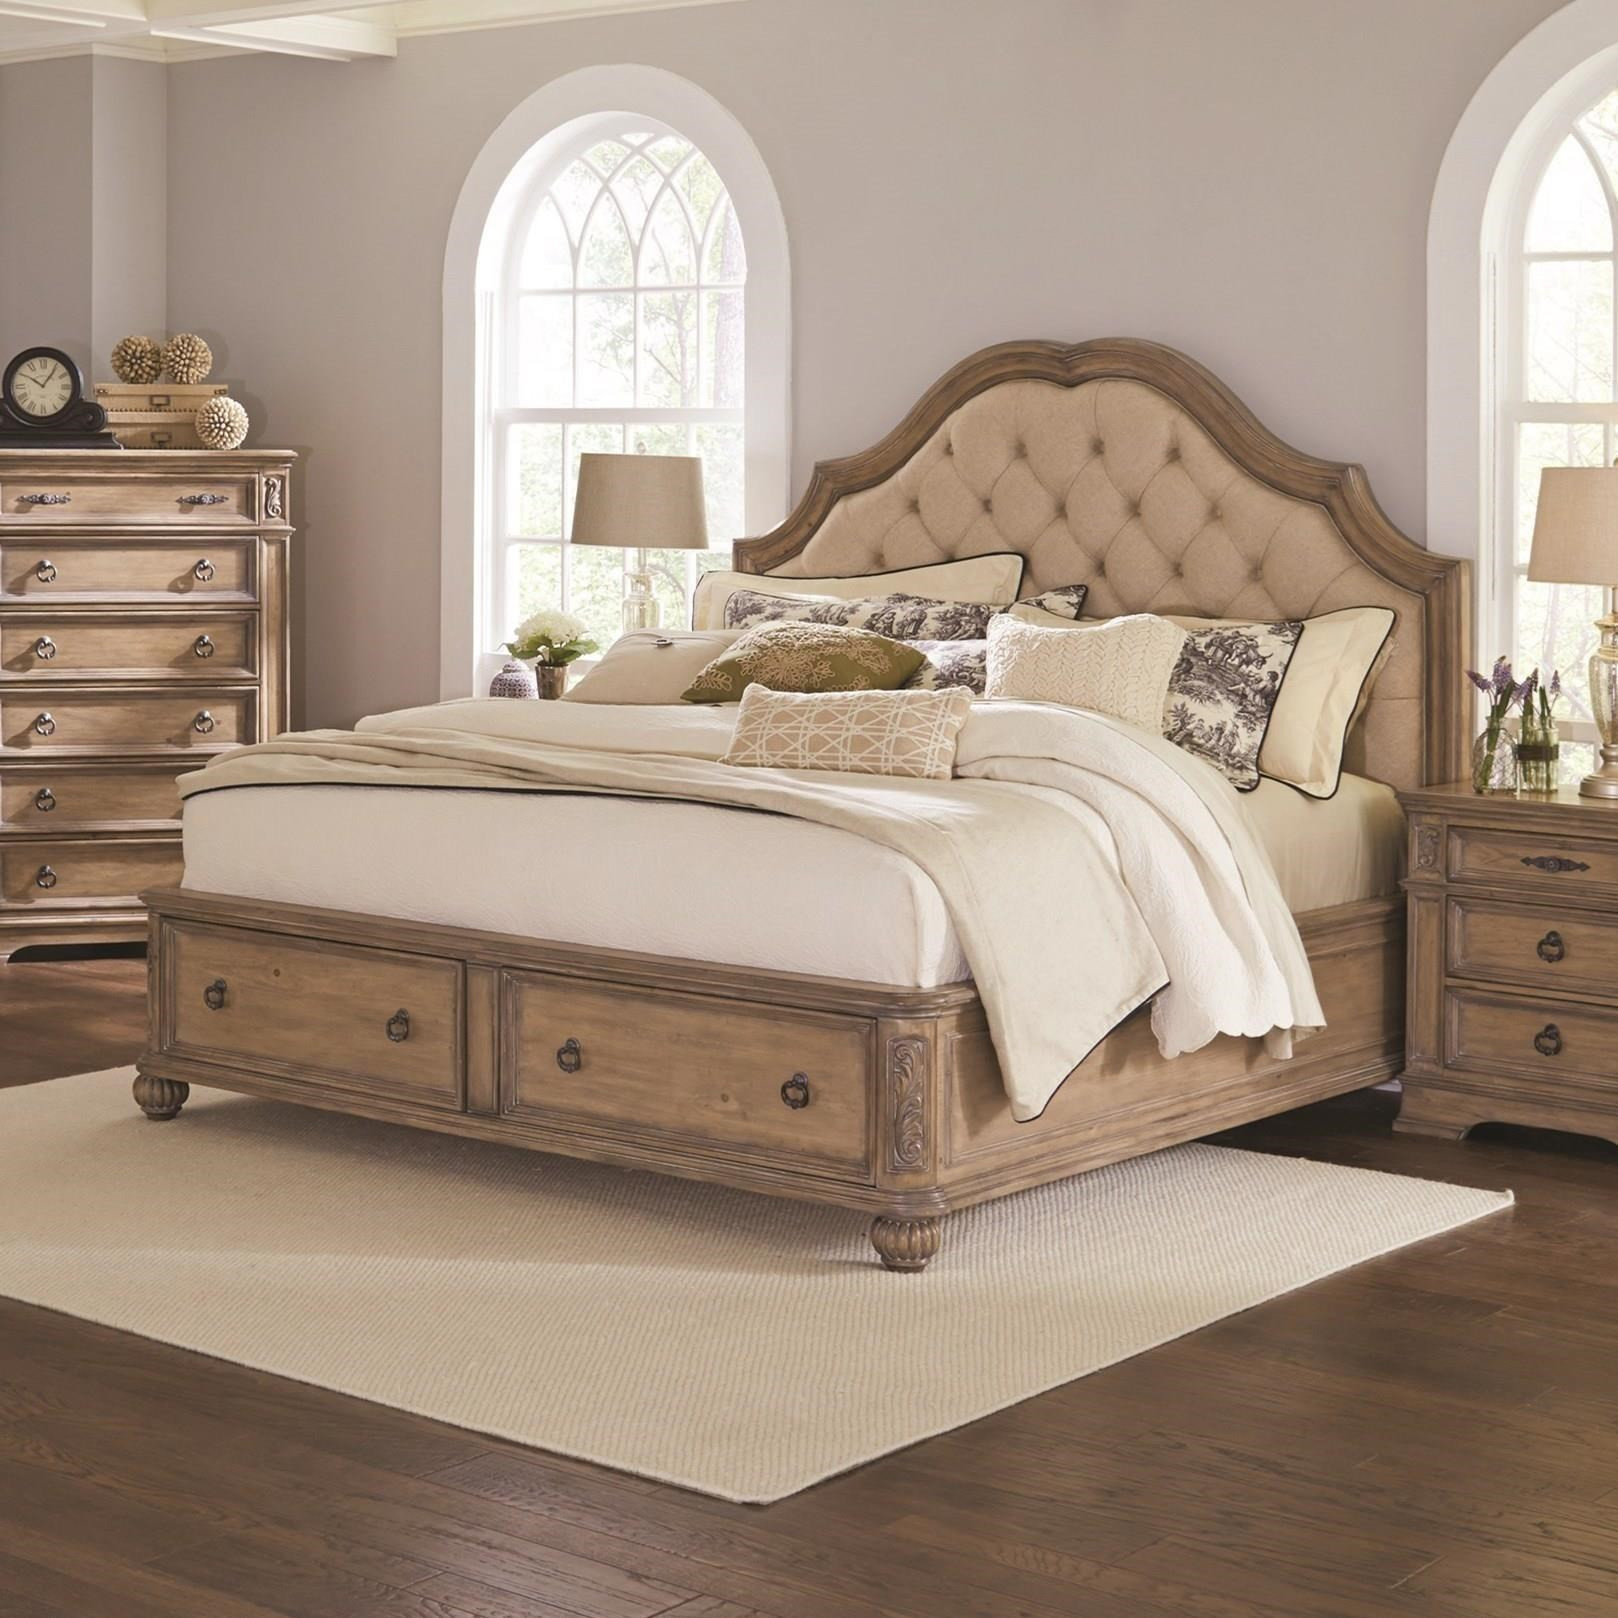 Queen Bedroom Sets With Storage
 Coaster Ilana Queen Storage Bed with Upholstered Headboard